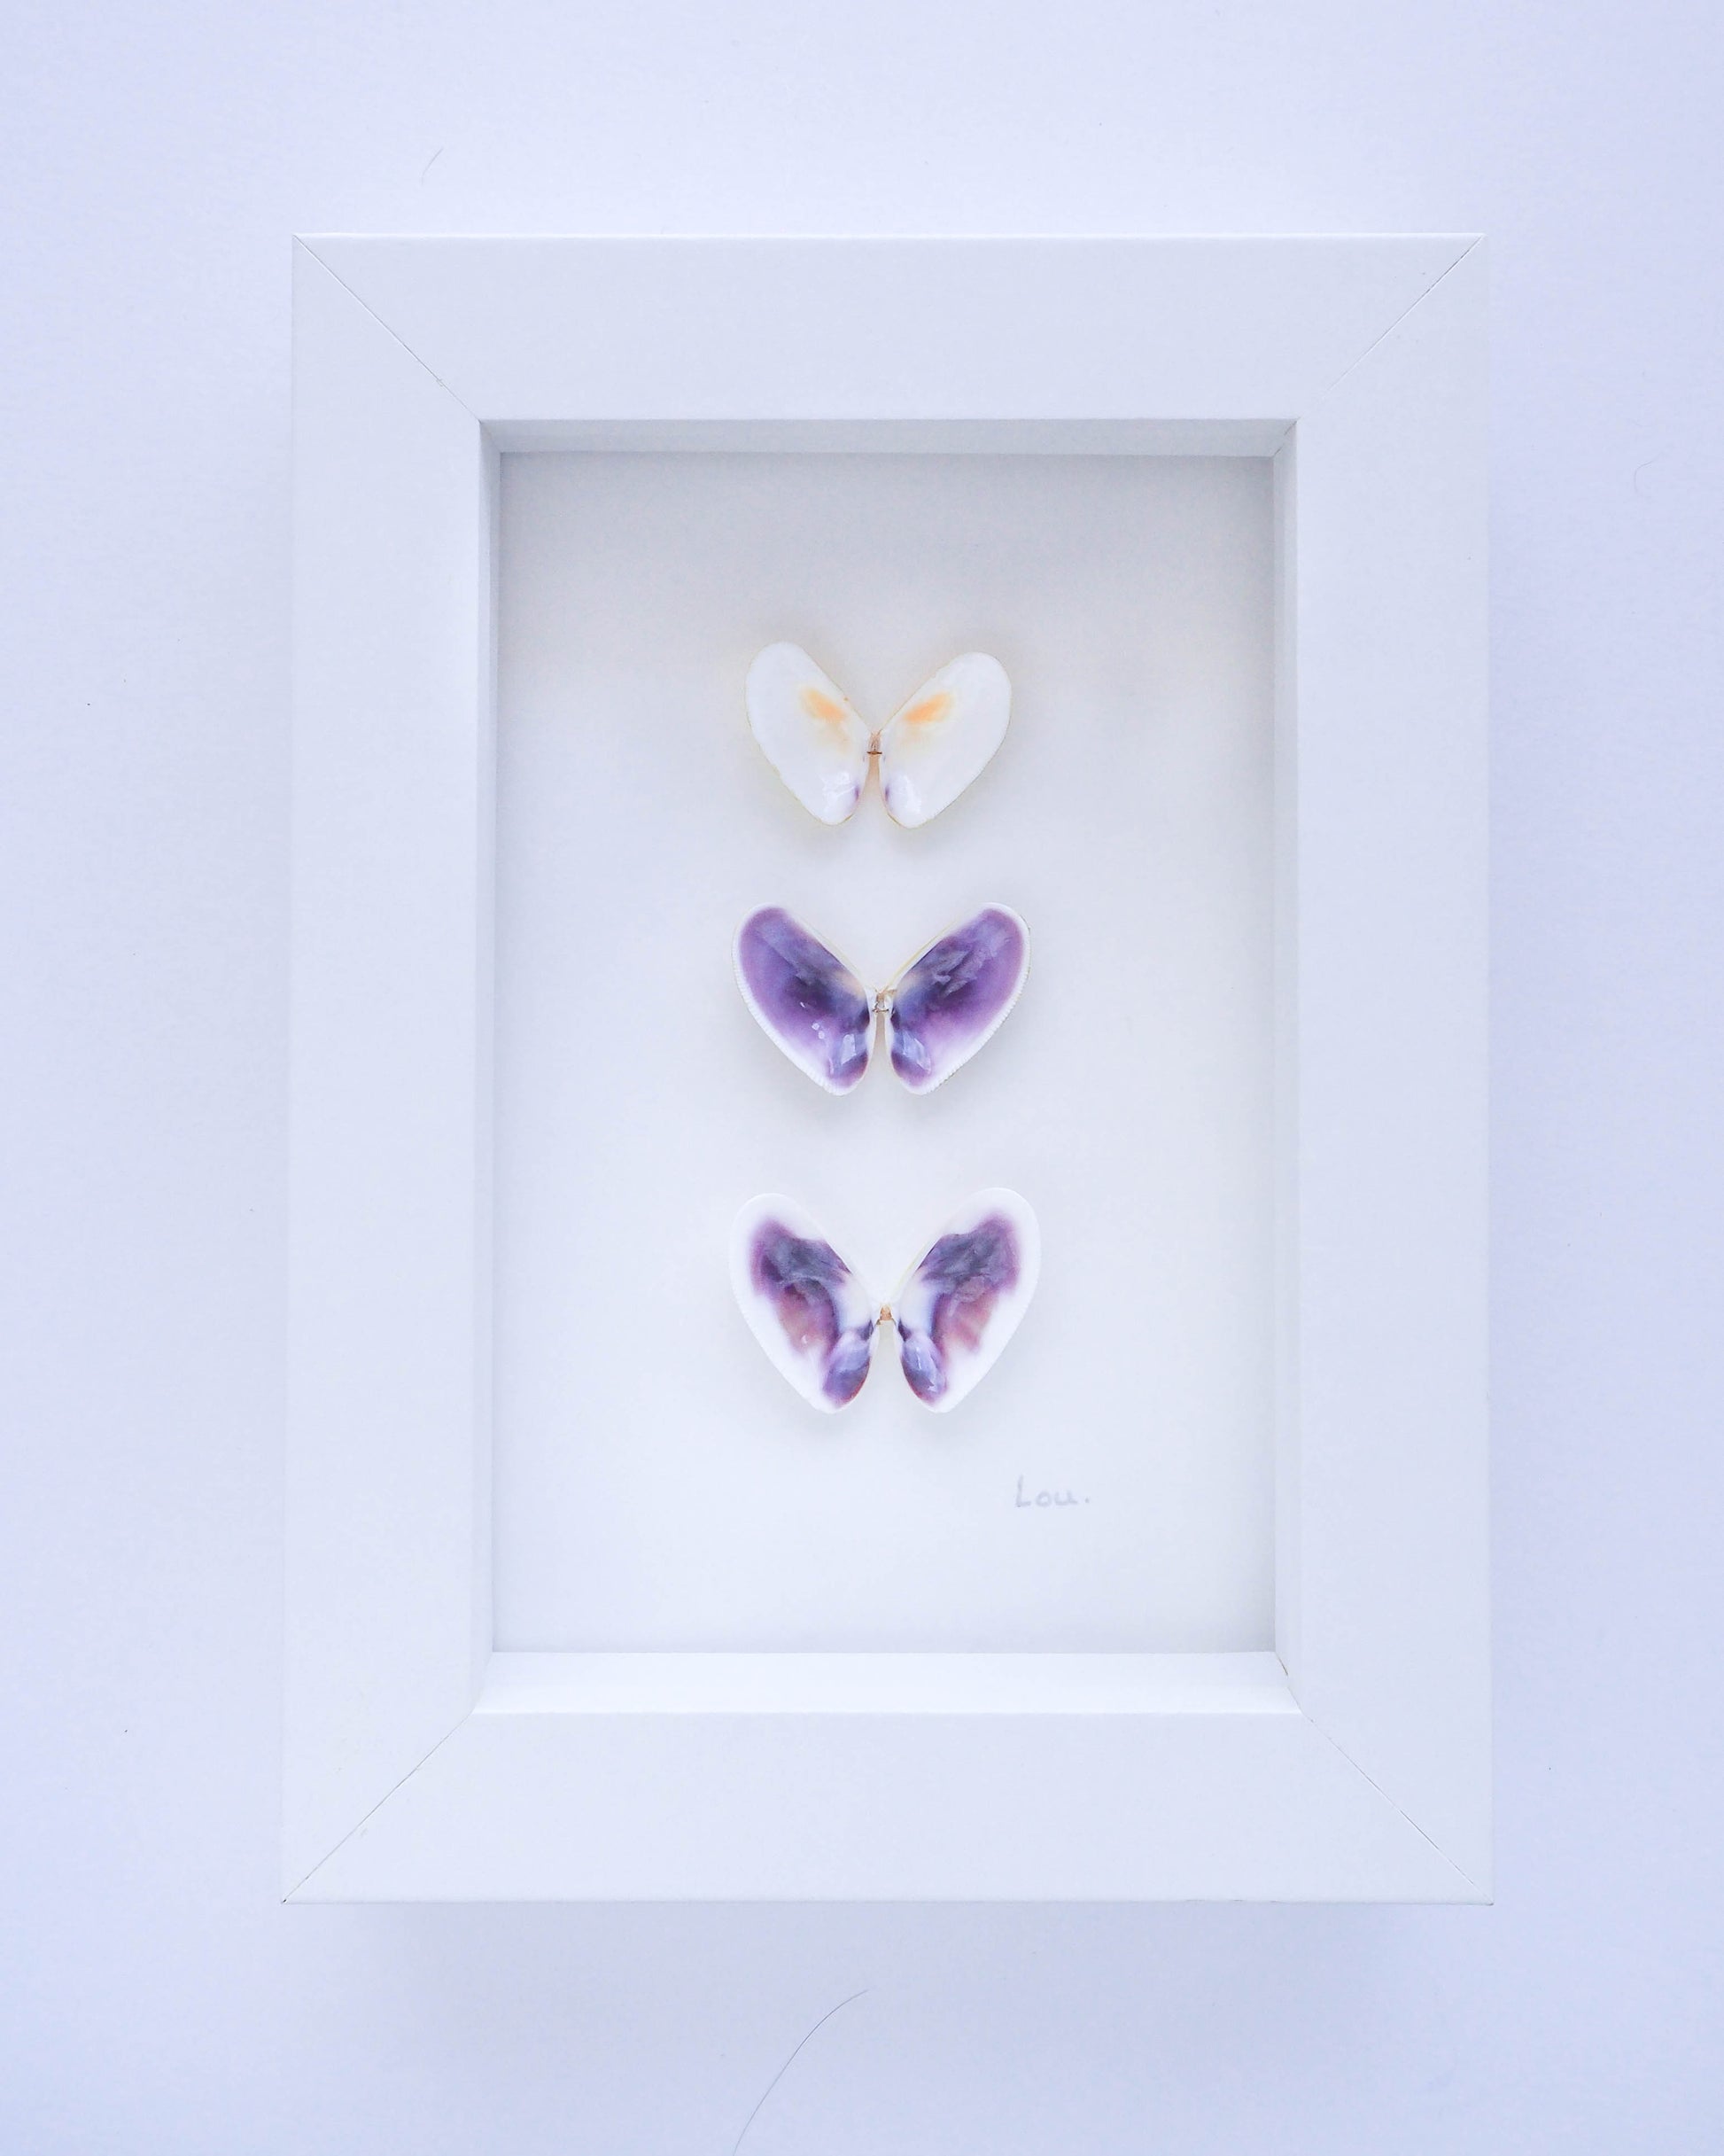 Shell Butterflies in frame coastal artwork from Portugal, Coastal Decor Sea by Lou, Seabylou